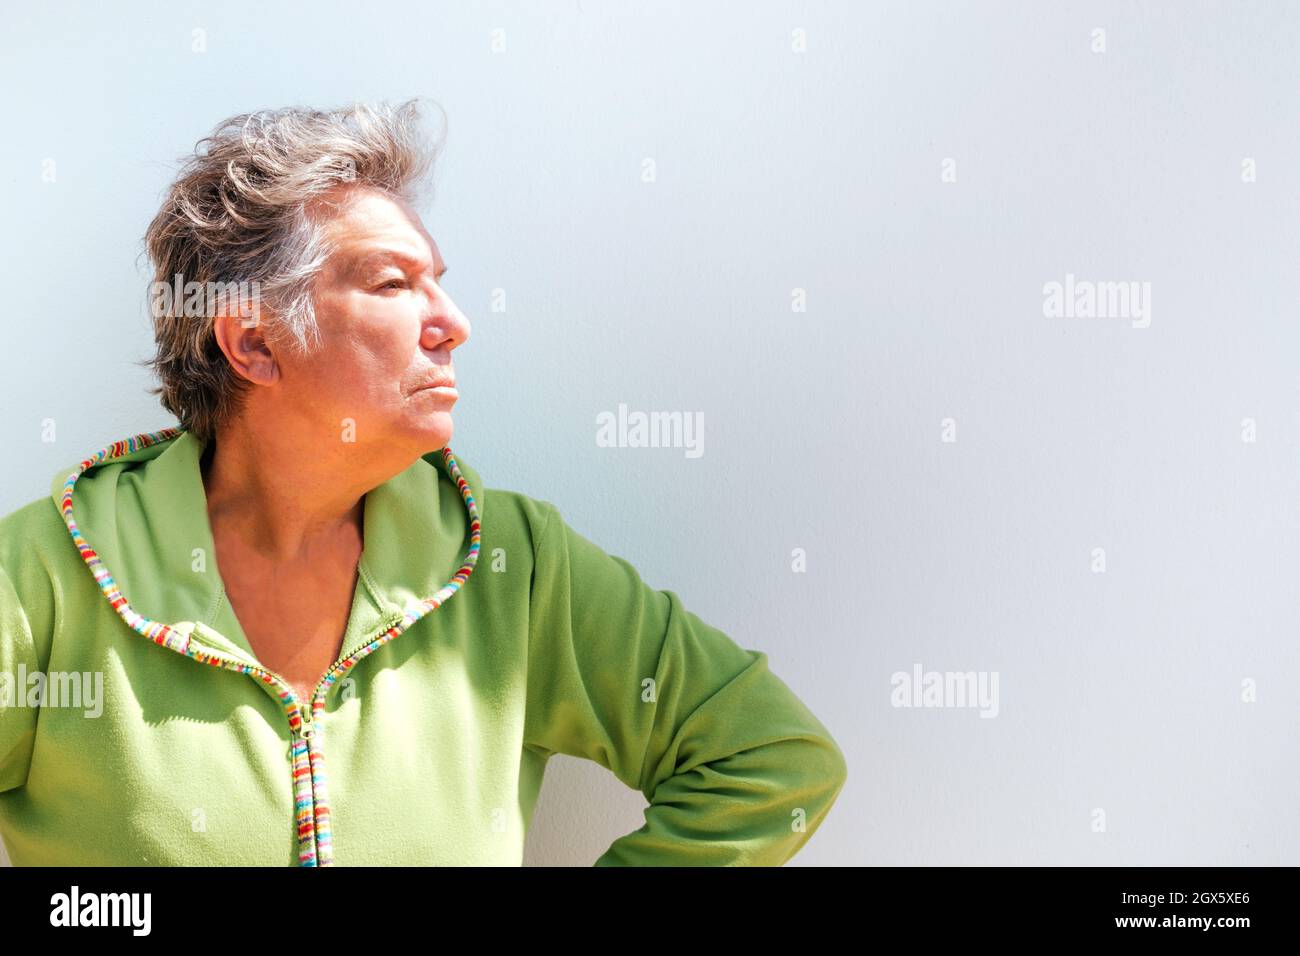 Profile portrait of an elderly woman with short gray hair looking angry on a white background. Photo with copyspace Stock Photo